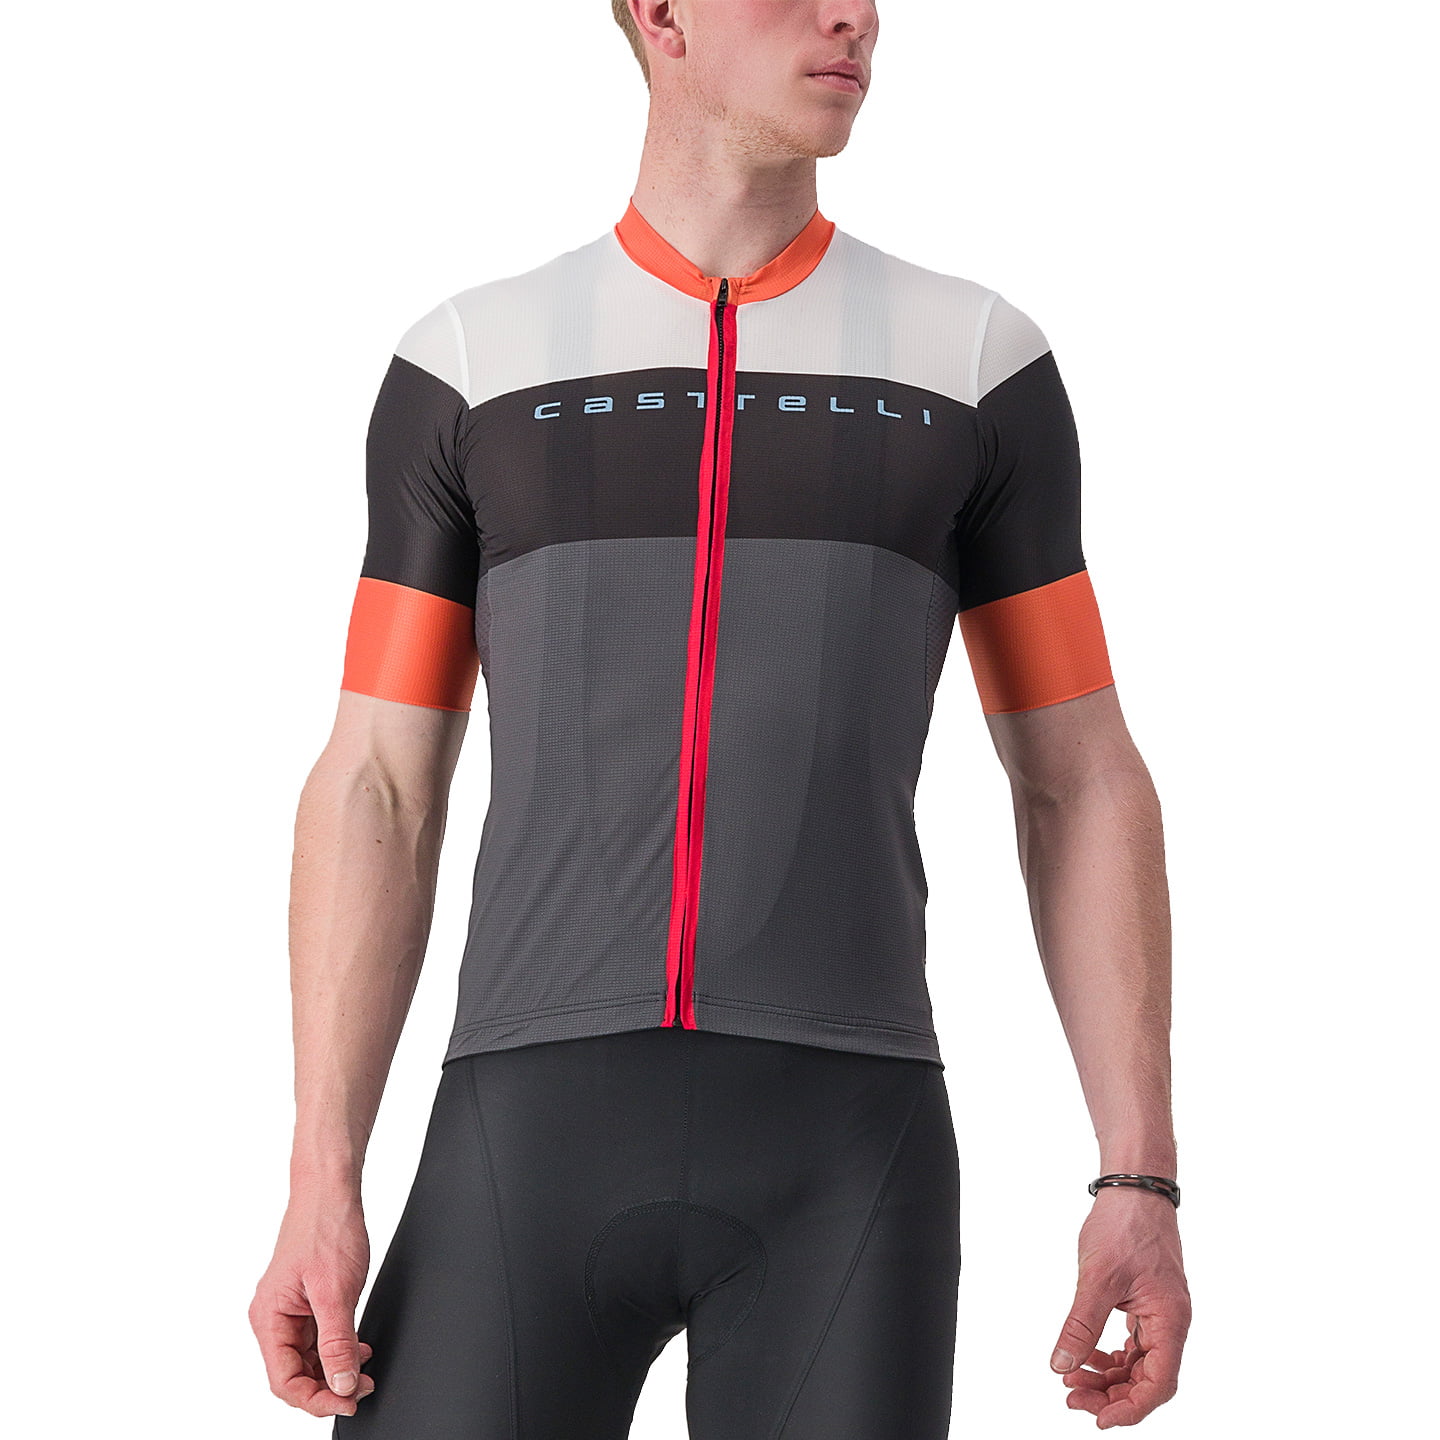 CASTELLI Sezione Short Sleeve Jersey Short Sleeve Jersey, for men, size 3XL, Cycling jersey, Cycle clothing